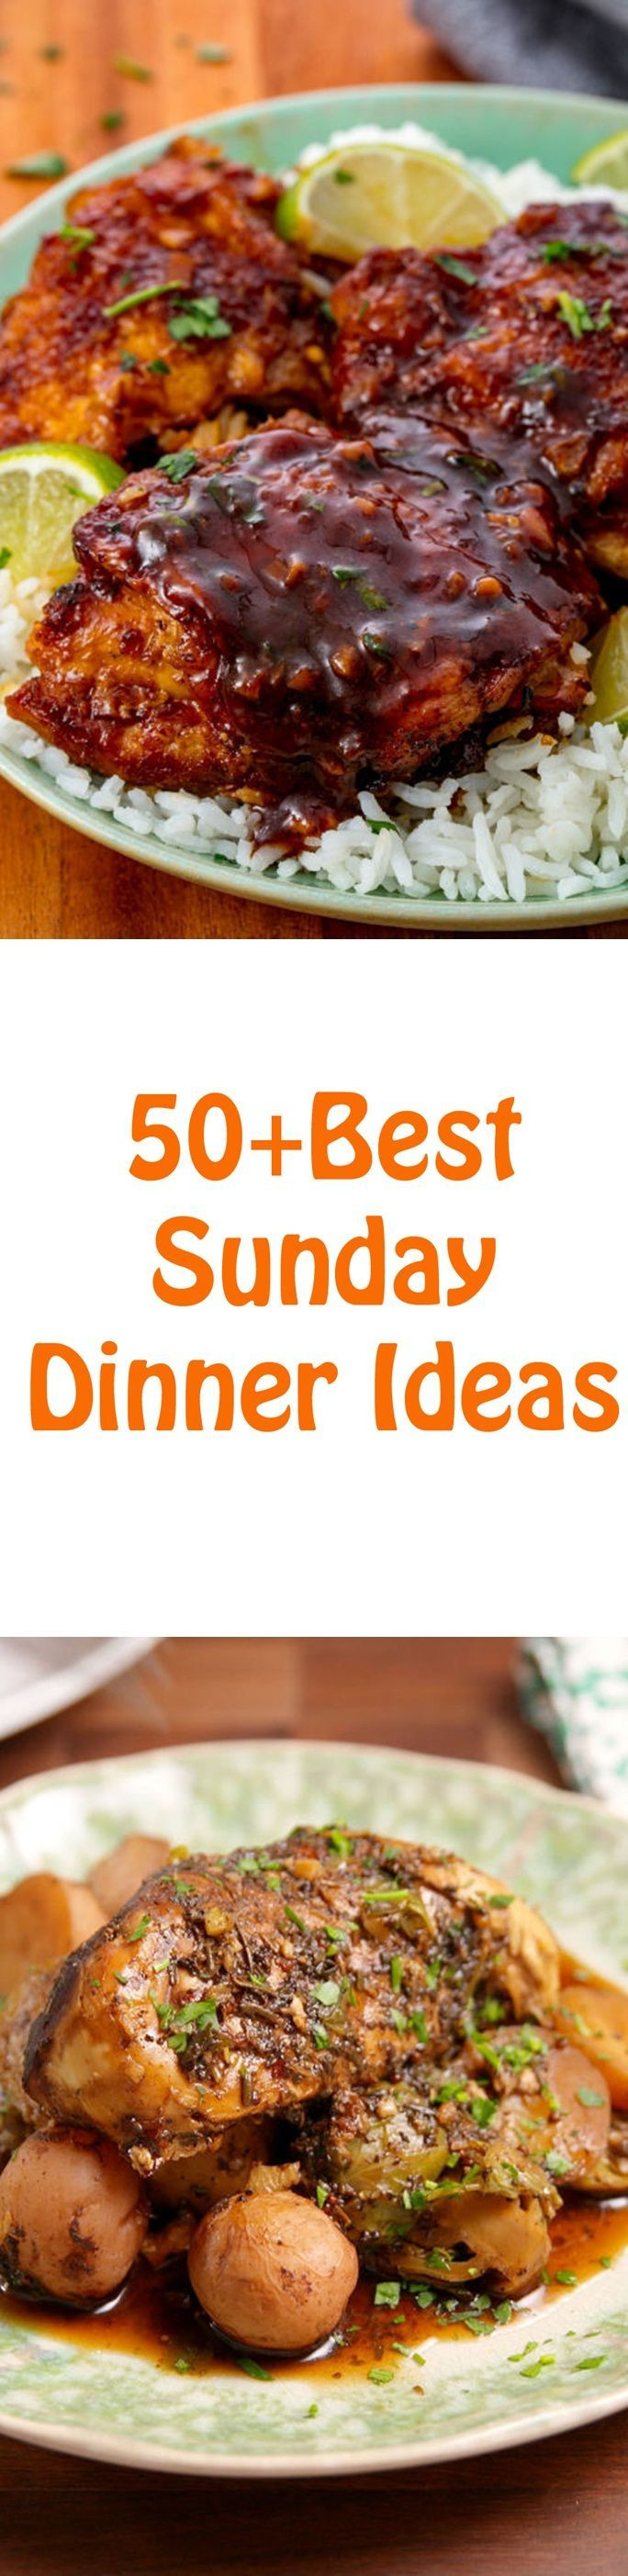 Fall Sunday Dinner Ideas
 The 25 best Southern sunday dinner ideas ideas on